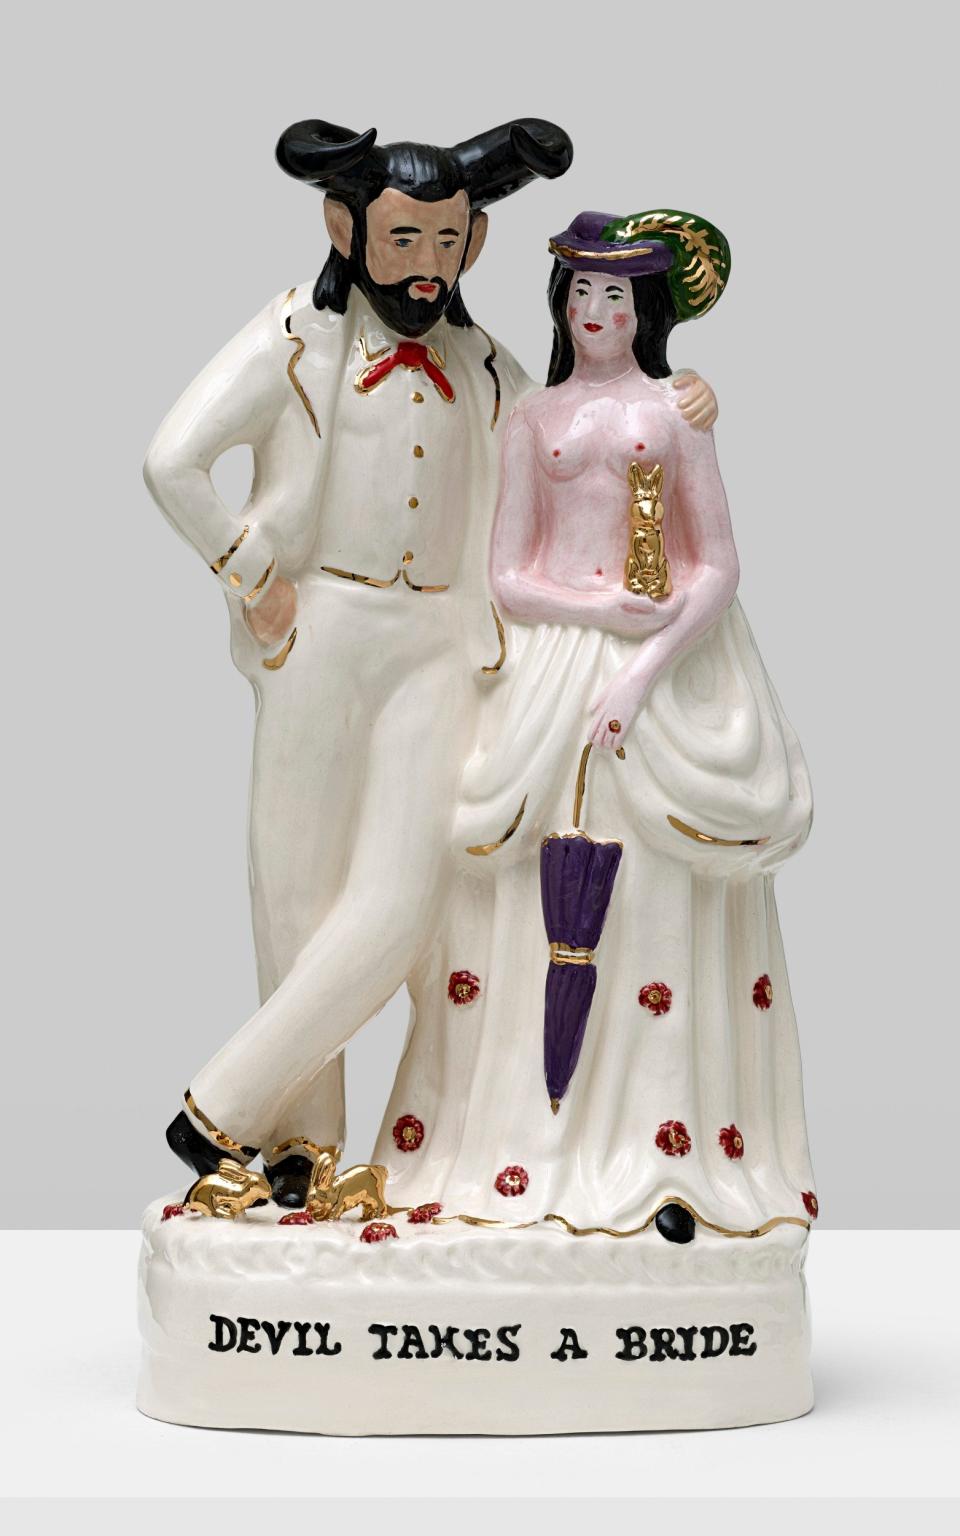 'Devil Takes A Bride' - one of Nick Cave's sculptures at the Sara Hildén Art Museum in Finland, in a joint exhibition with Brad Pitt and Thomas Houseago